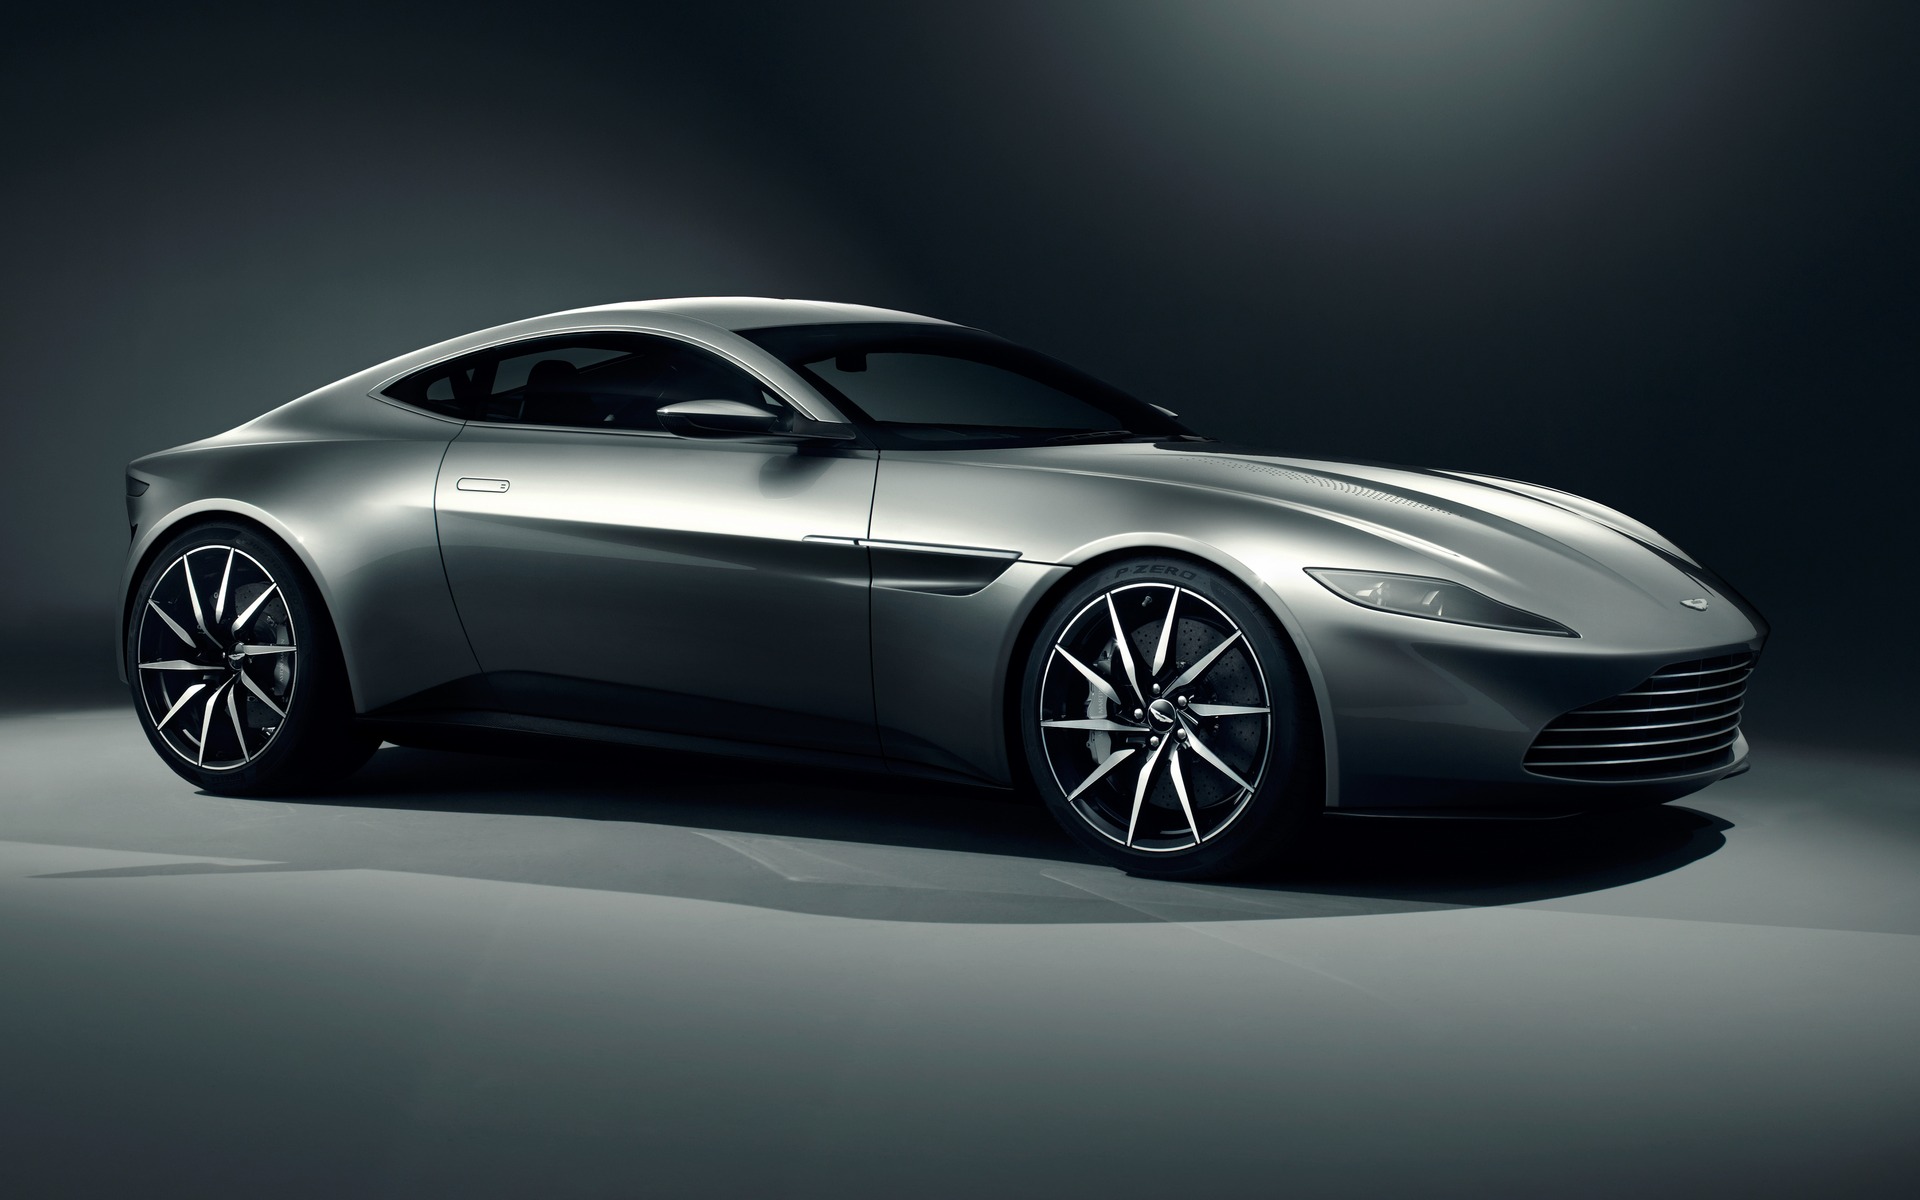 This beautiful DB10 has been created specifically for James Bond.